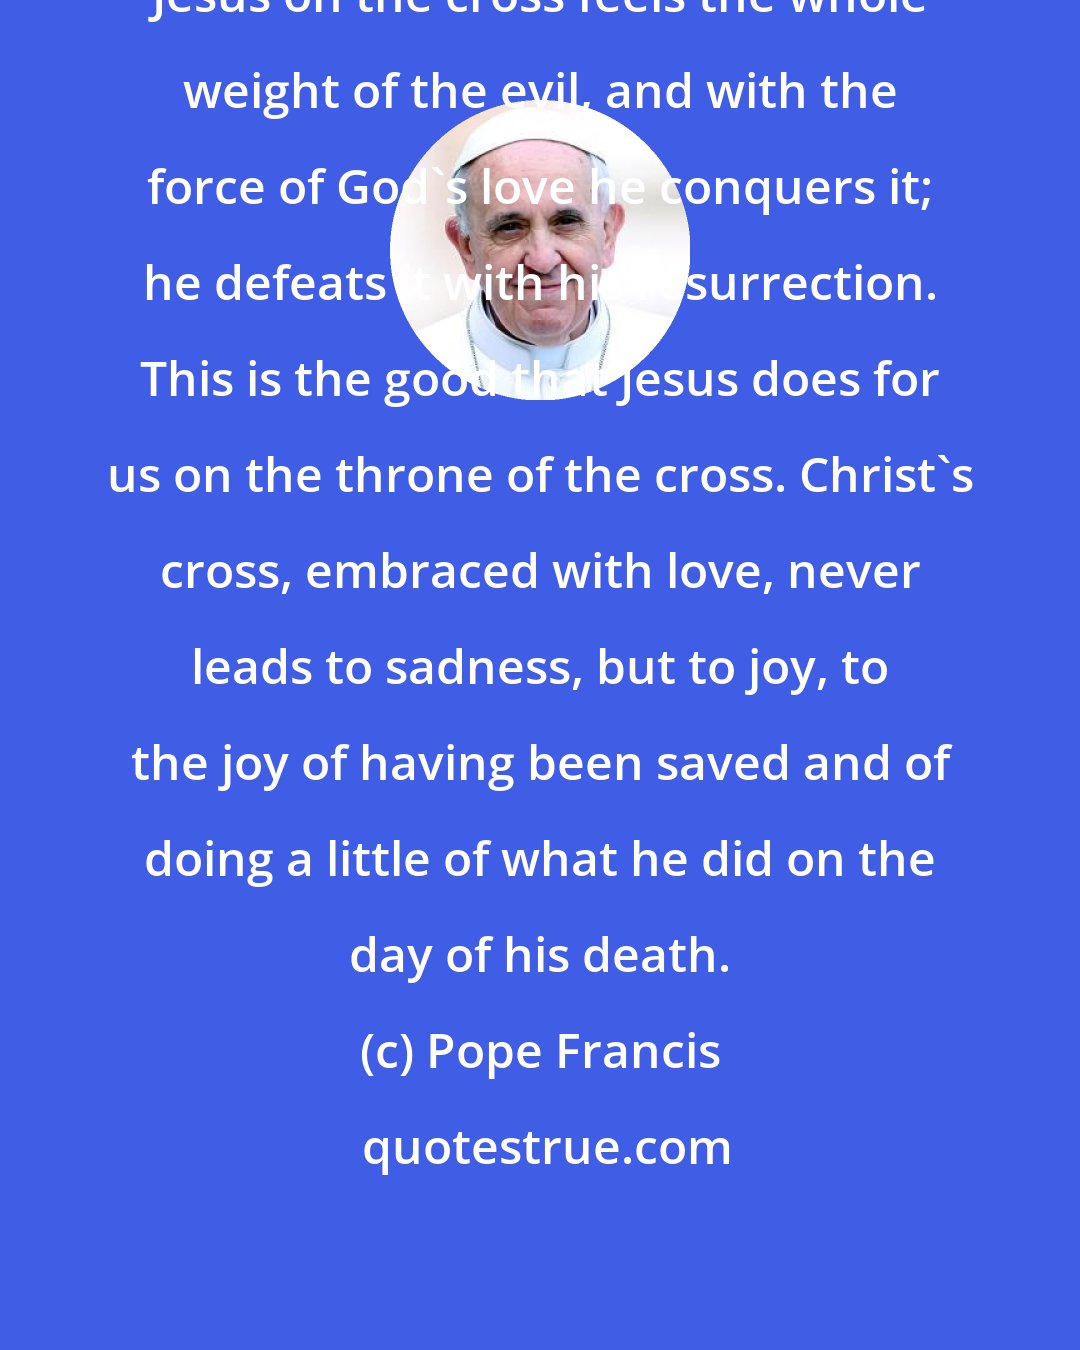 Pope Francis: Jesus on the cross feels the whole weight of the evil, and with the force of God's love he conquers it; he defeats it with his resurrection. This is the good that Jesus does for us on the throne of the cross. Christ's cross, embraced with love, never leads to sadness, but to joy, to the joy of having been saved and of doing a little of what he did on the day of his death.